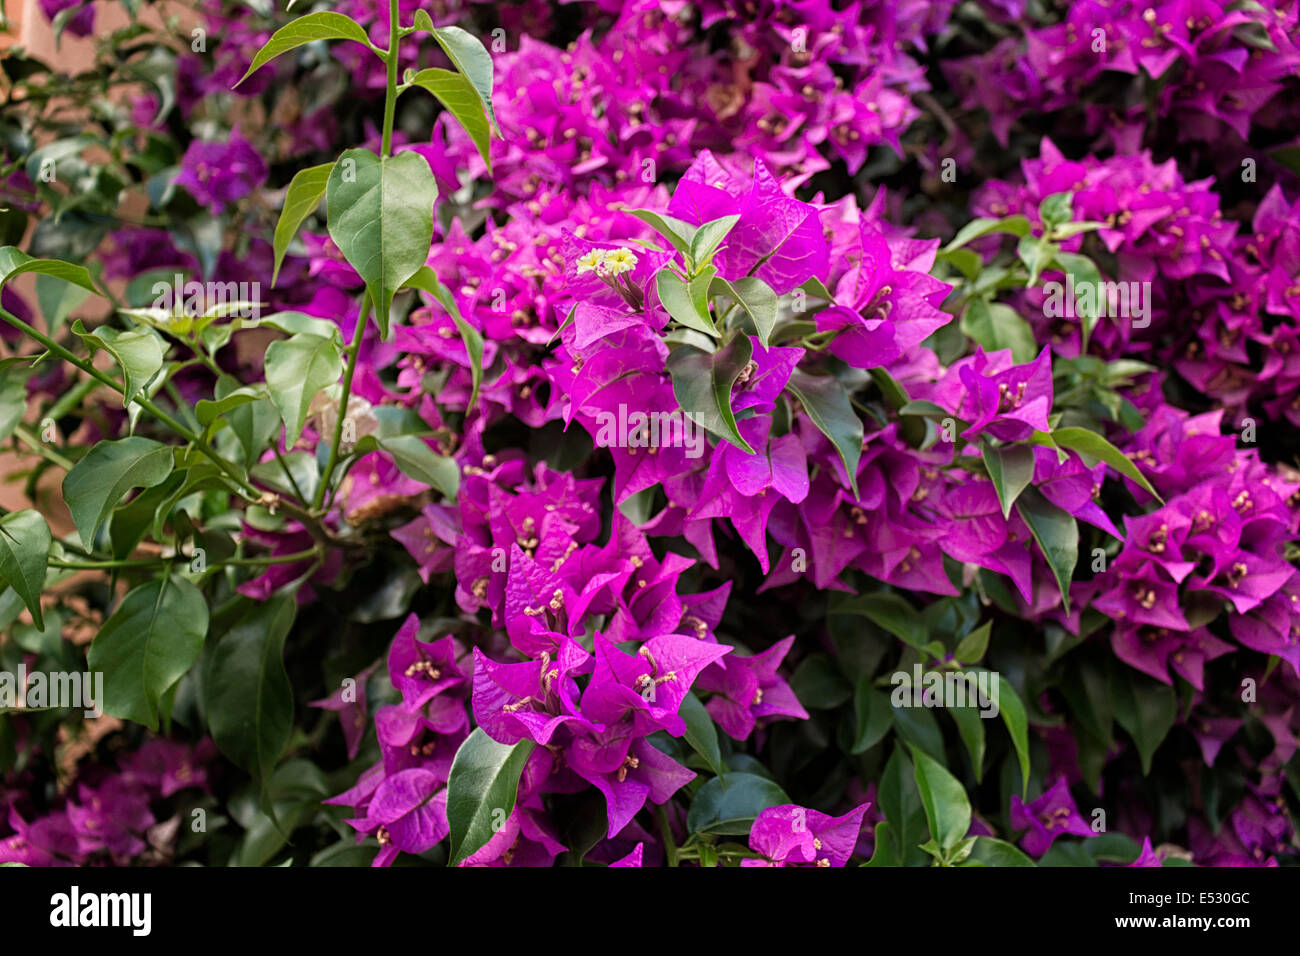 Bougainvillea glabra: glossy, dark green leaves and glorious magenta floral bracts. Stock Photo